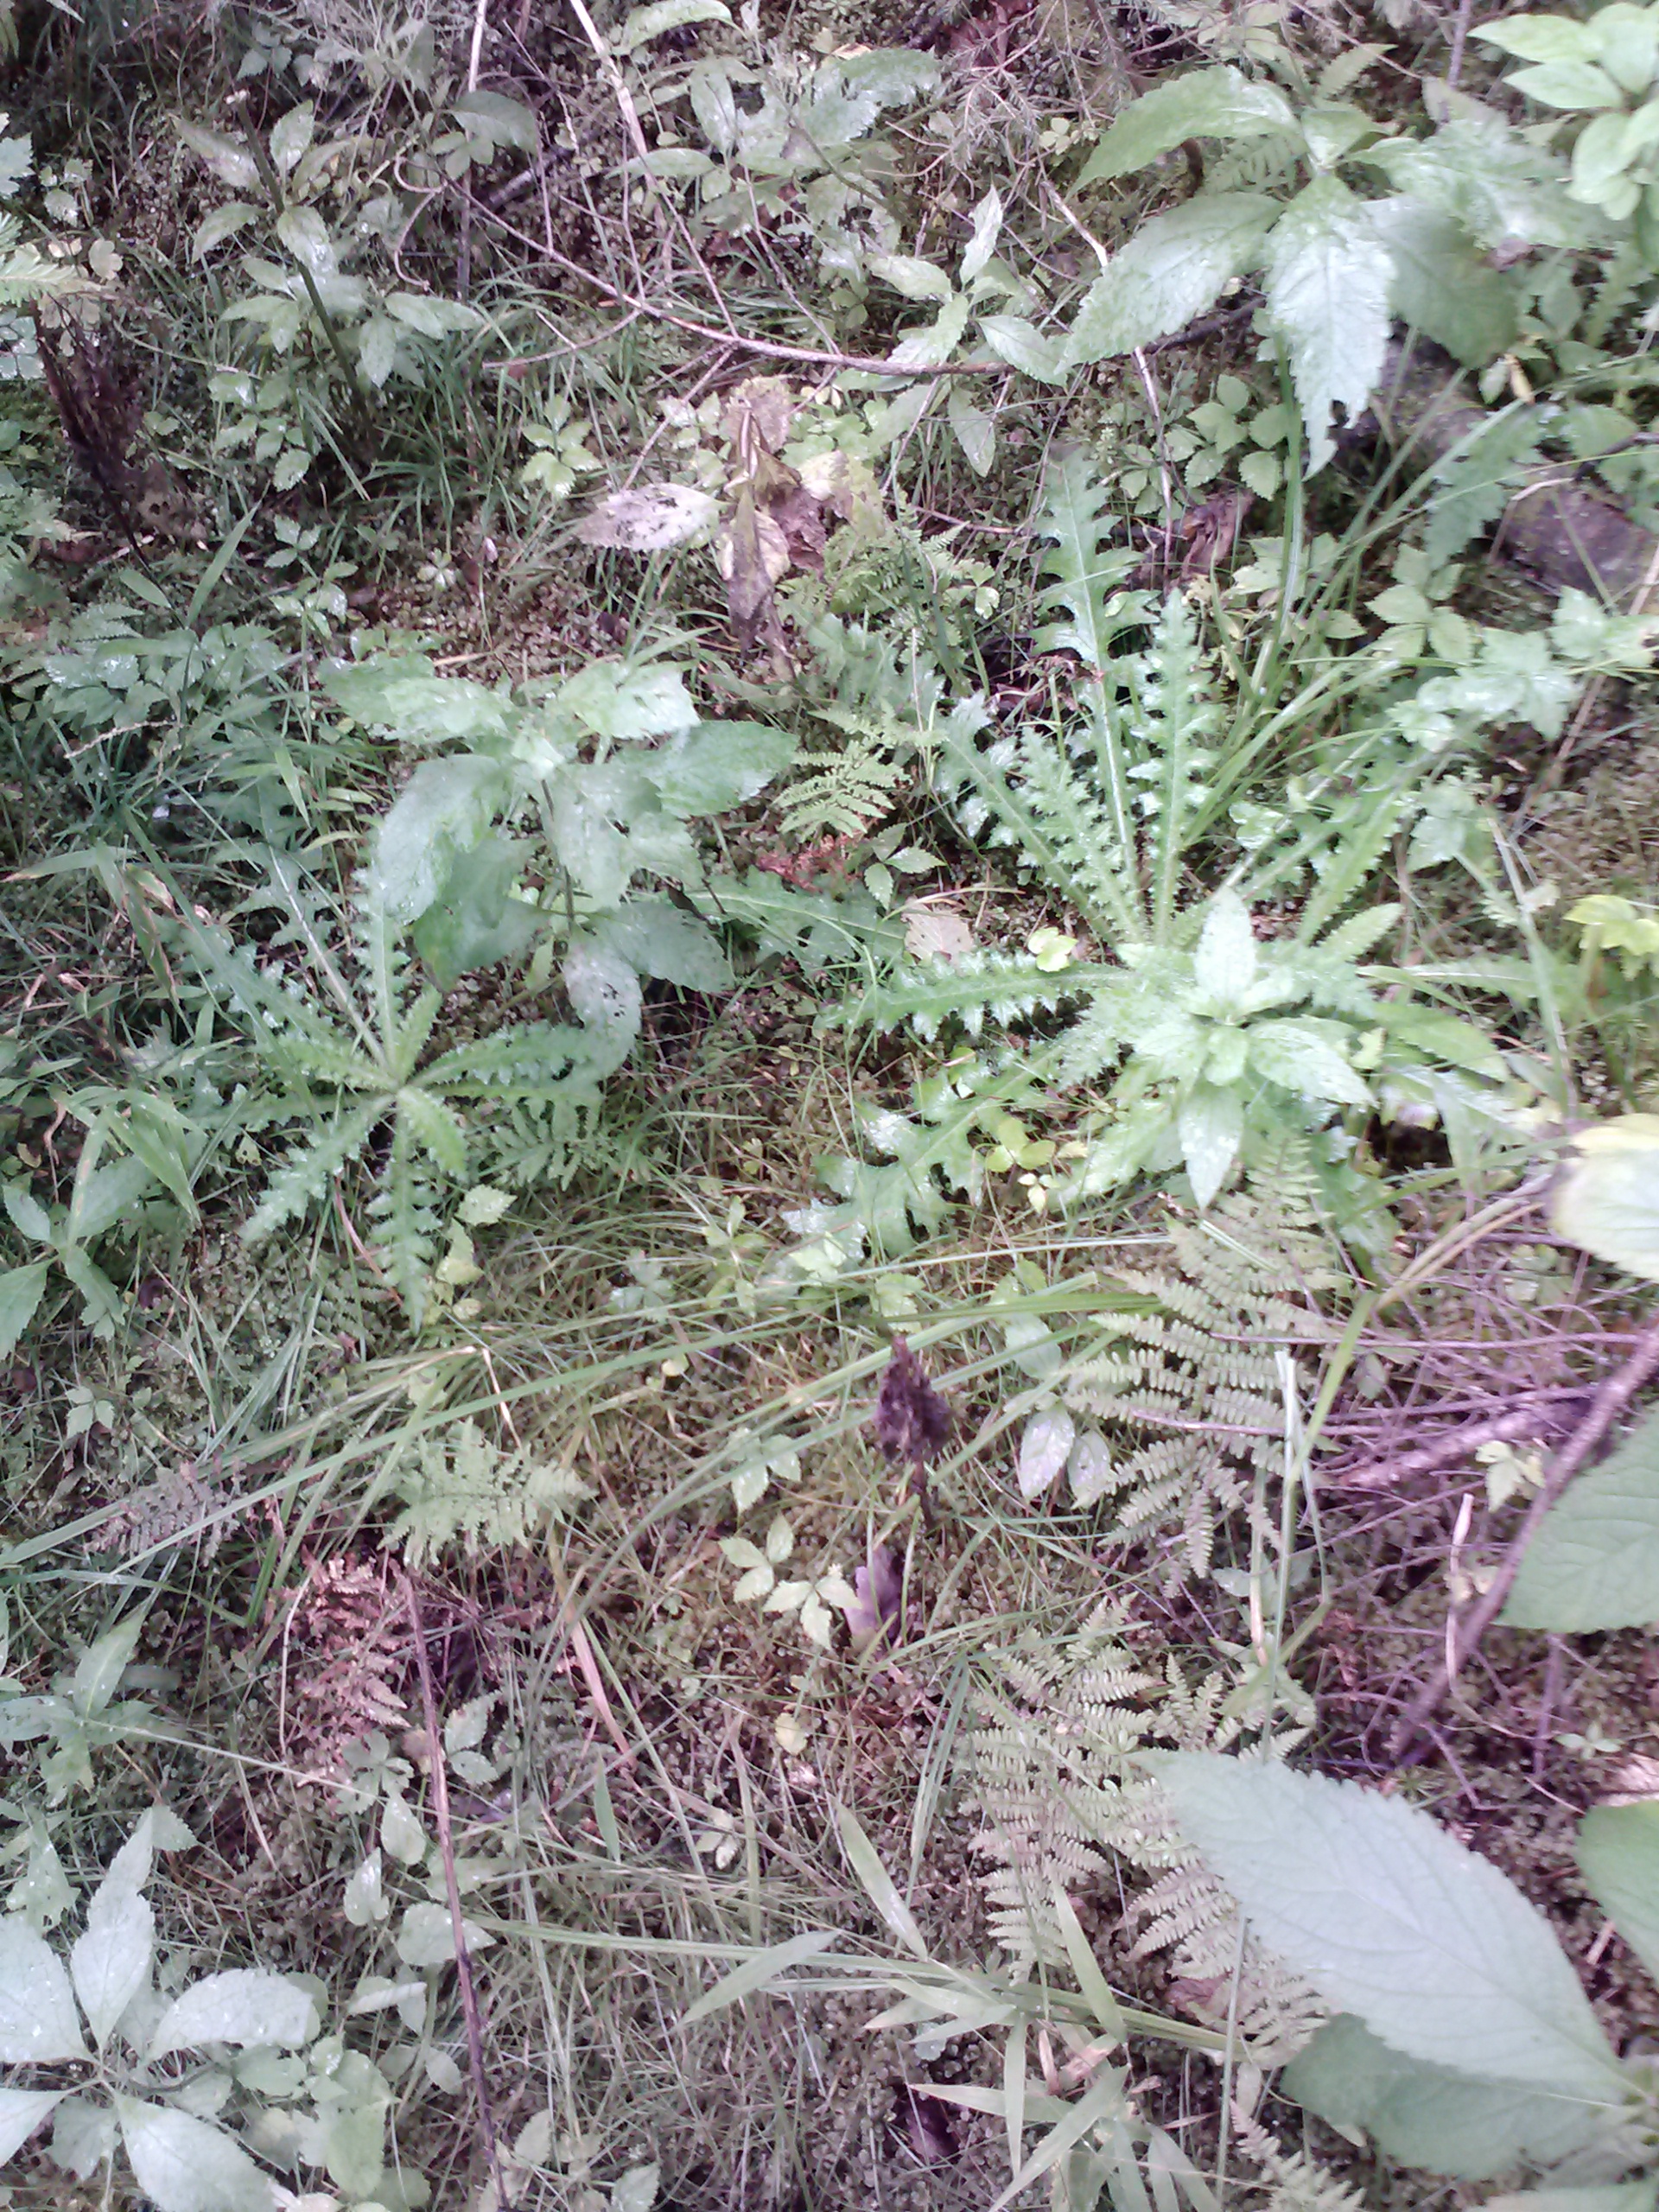 European Swamp Thistle Rosettes in the McCormick Wilderness Area